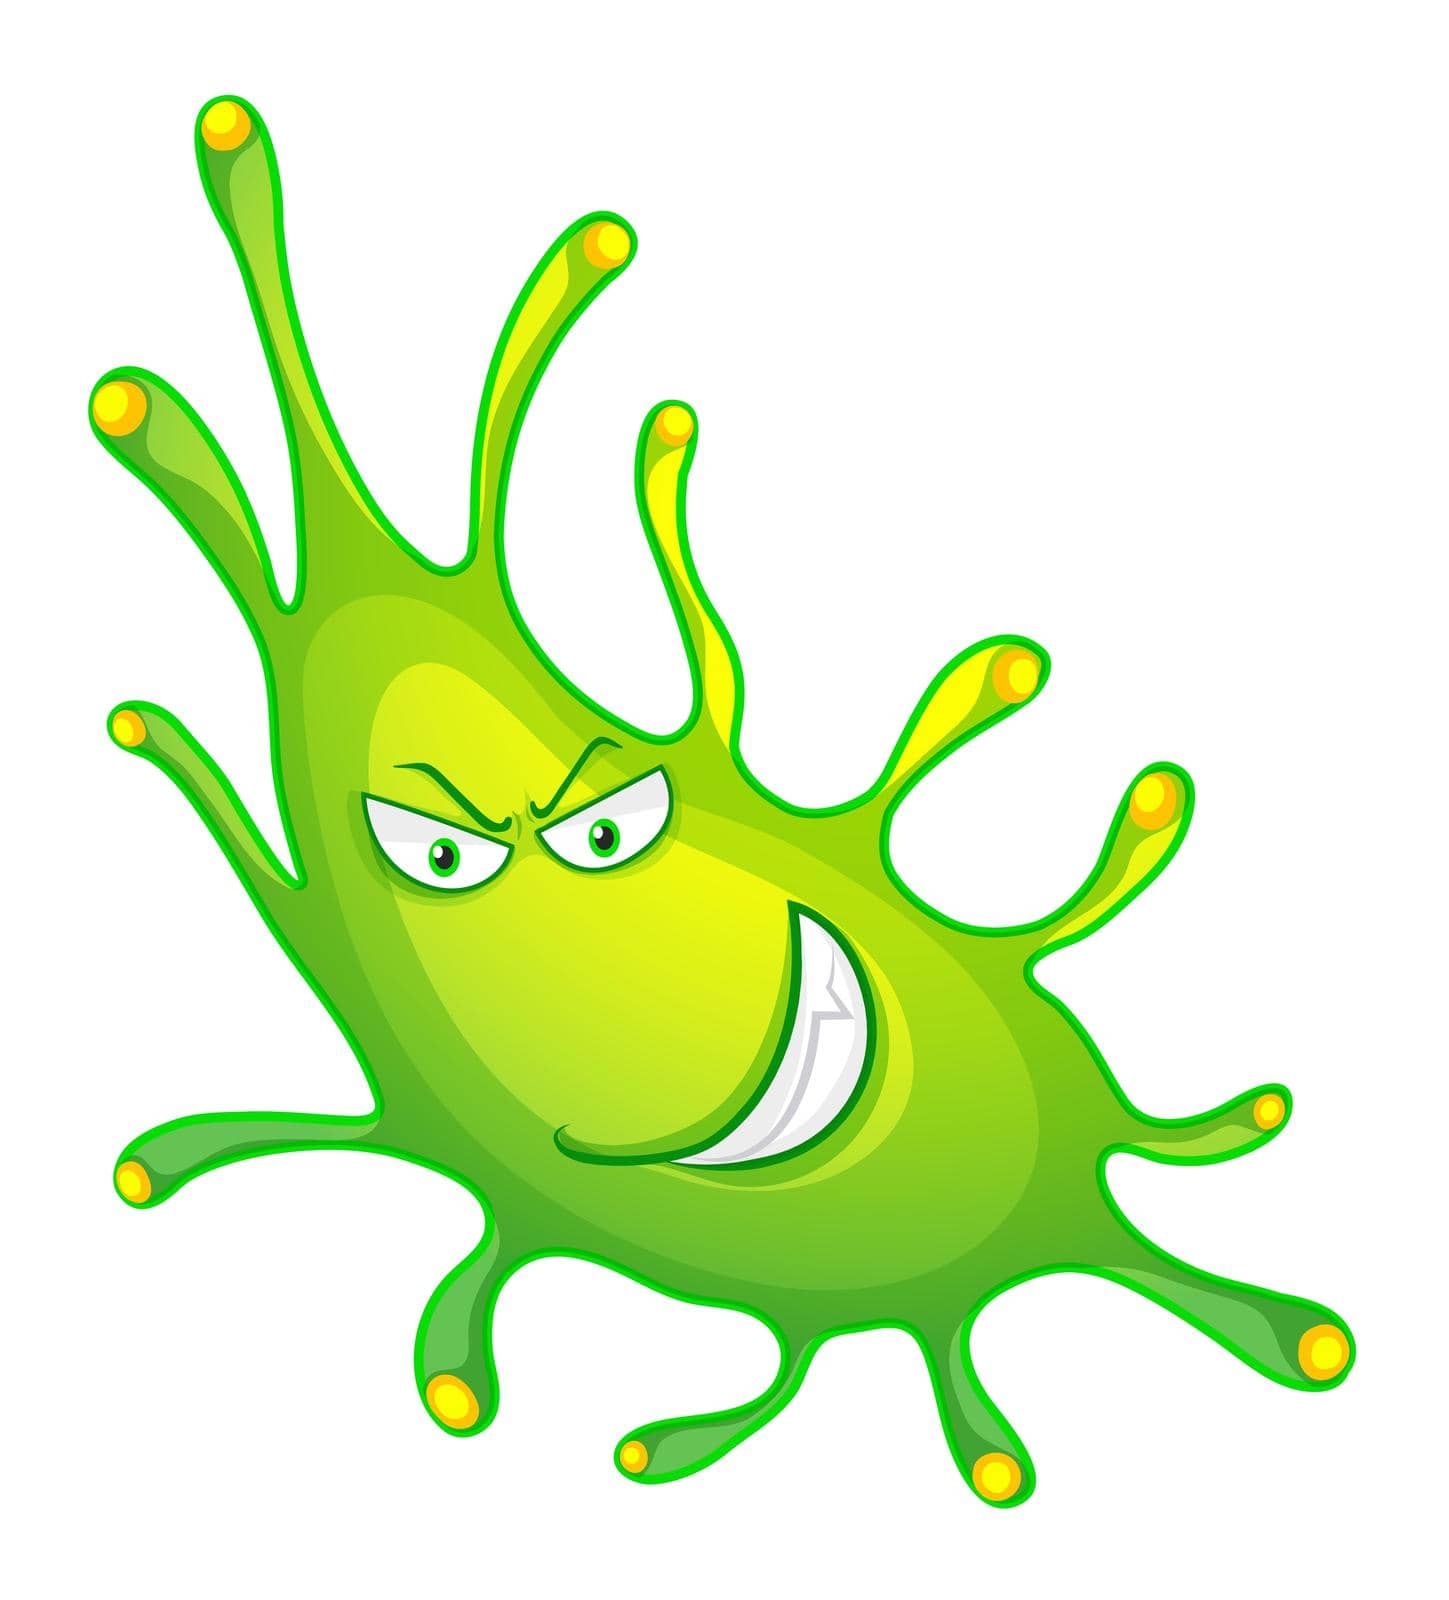 Green bacteria with monster face illustration